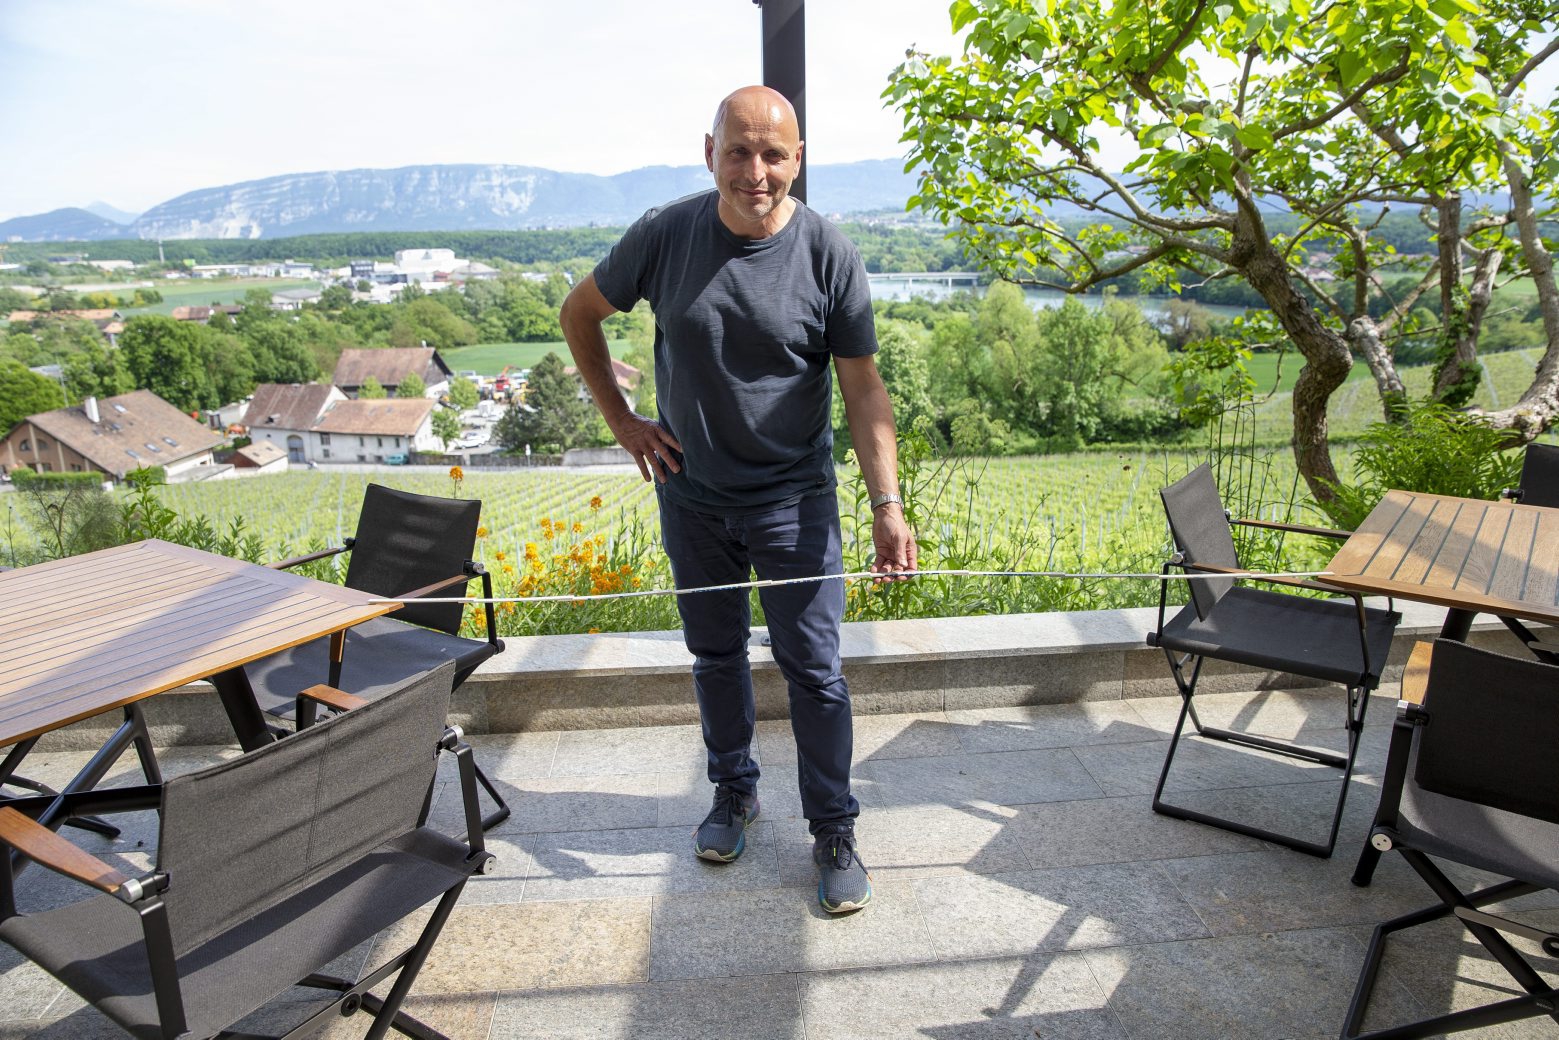 Swiss Chef Philippe Chevrier prepares his terrace at the restaurant of Domaine de Chateauvieux for the reopening by respecting the sanitary rules during the Swiss state of emergency due to the coronavirus COVID-19, in Satigny near Geneva, Switzerland, Friday, May 8, 2020. In Switzerland from 11 May, loosening measures slowing down the ongoing pandemic of the COVID-19 disease, which is caused by the SARS-CoV-2 coronavirus, become effective by step. Classroom teaching at primary and lower secondary schools will again be permitted. Shops, markets, museums, libraries and restaurants will be able to reopen under strict compliance with precautionary measures. (KEYSTONE/Salvatore Di Nolfi) SWITZERLAND PANDEMIC CORONAVIRUS COVID-19